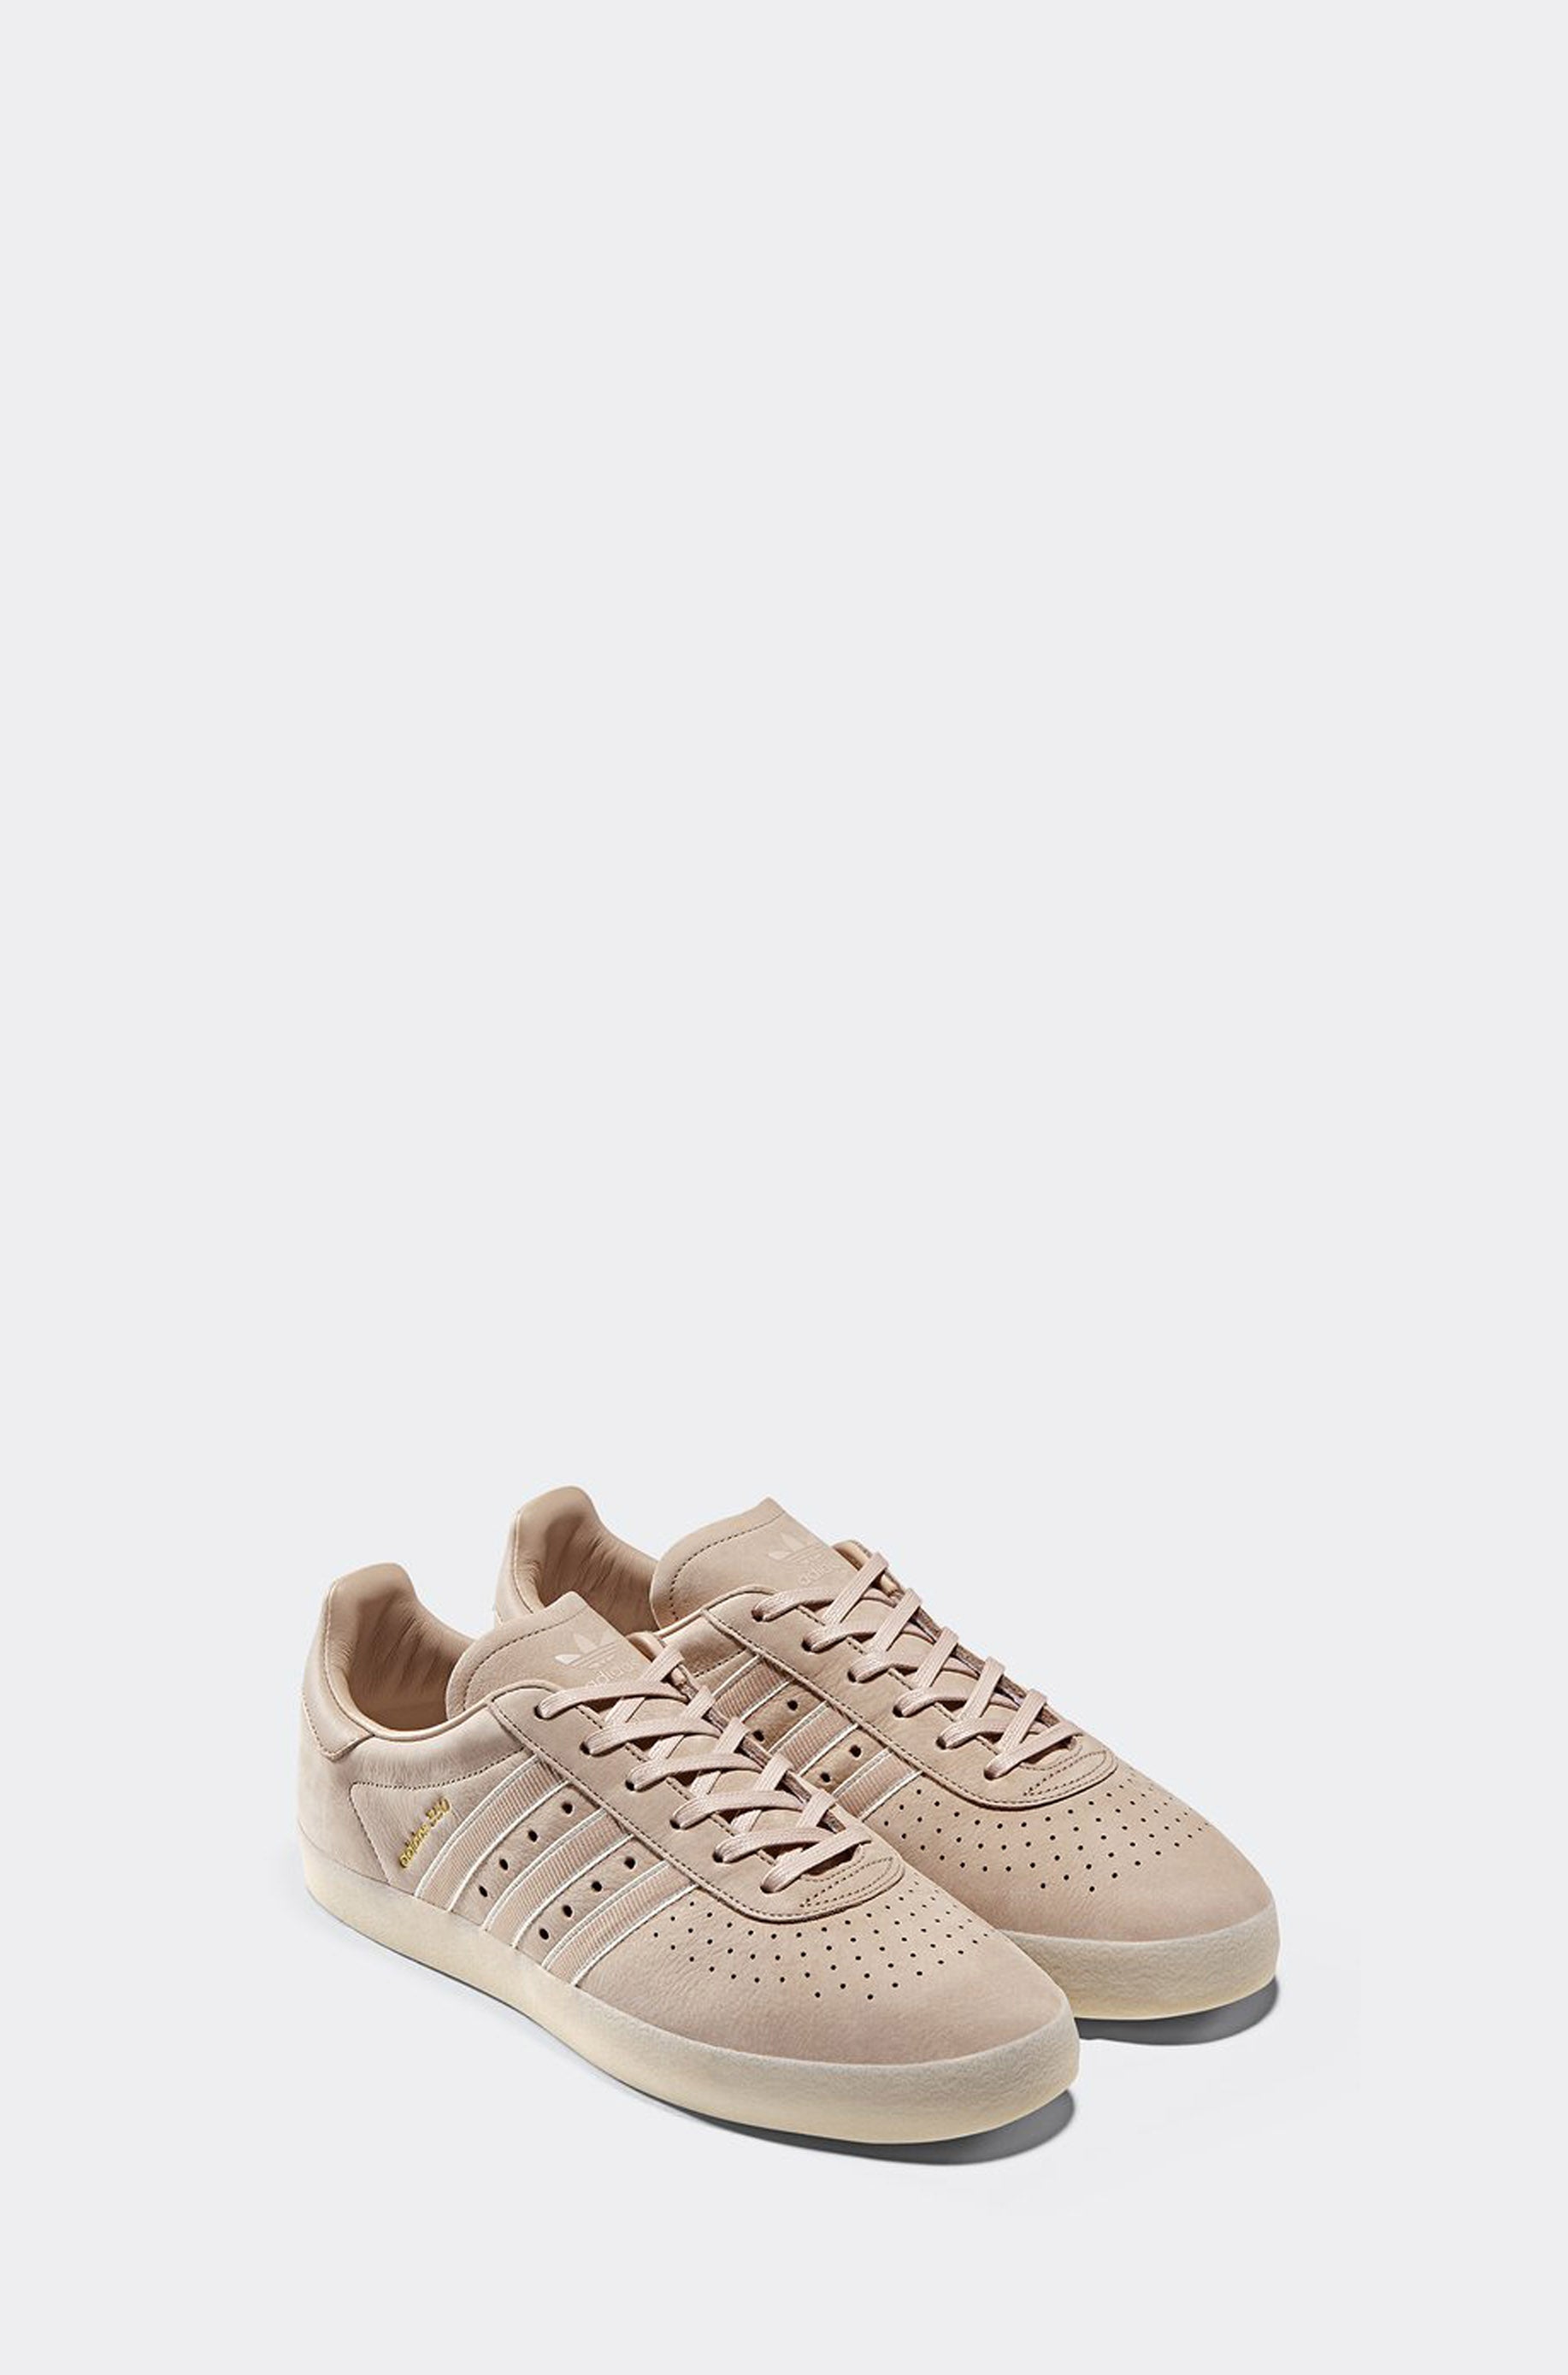 Adidas x 350 – Oyster Holdings